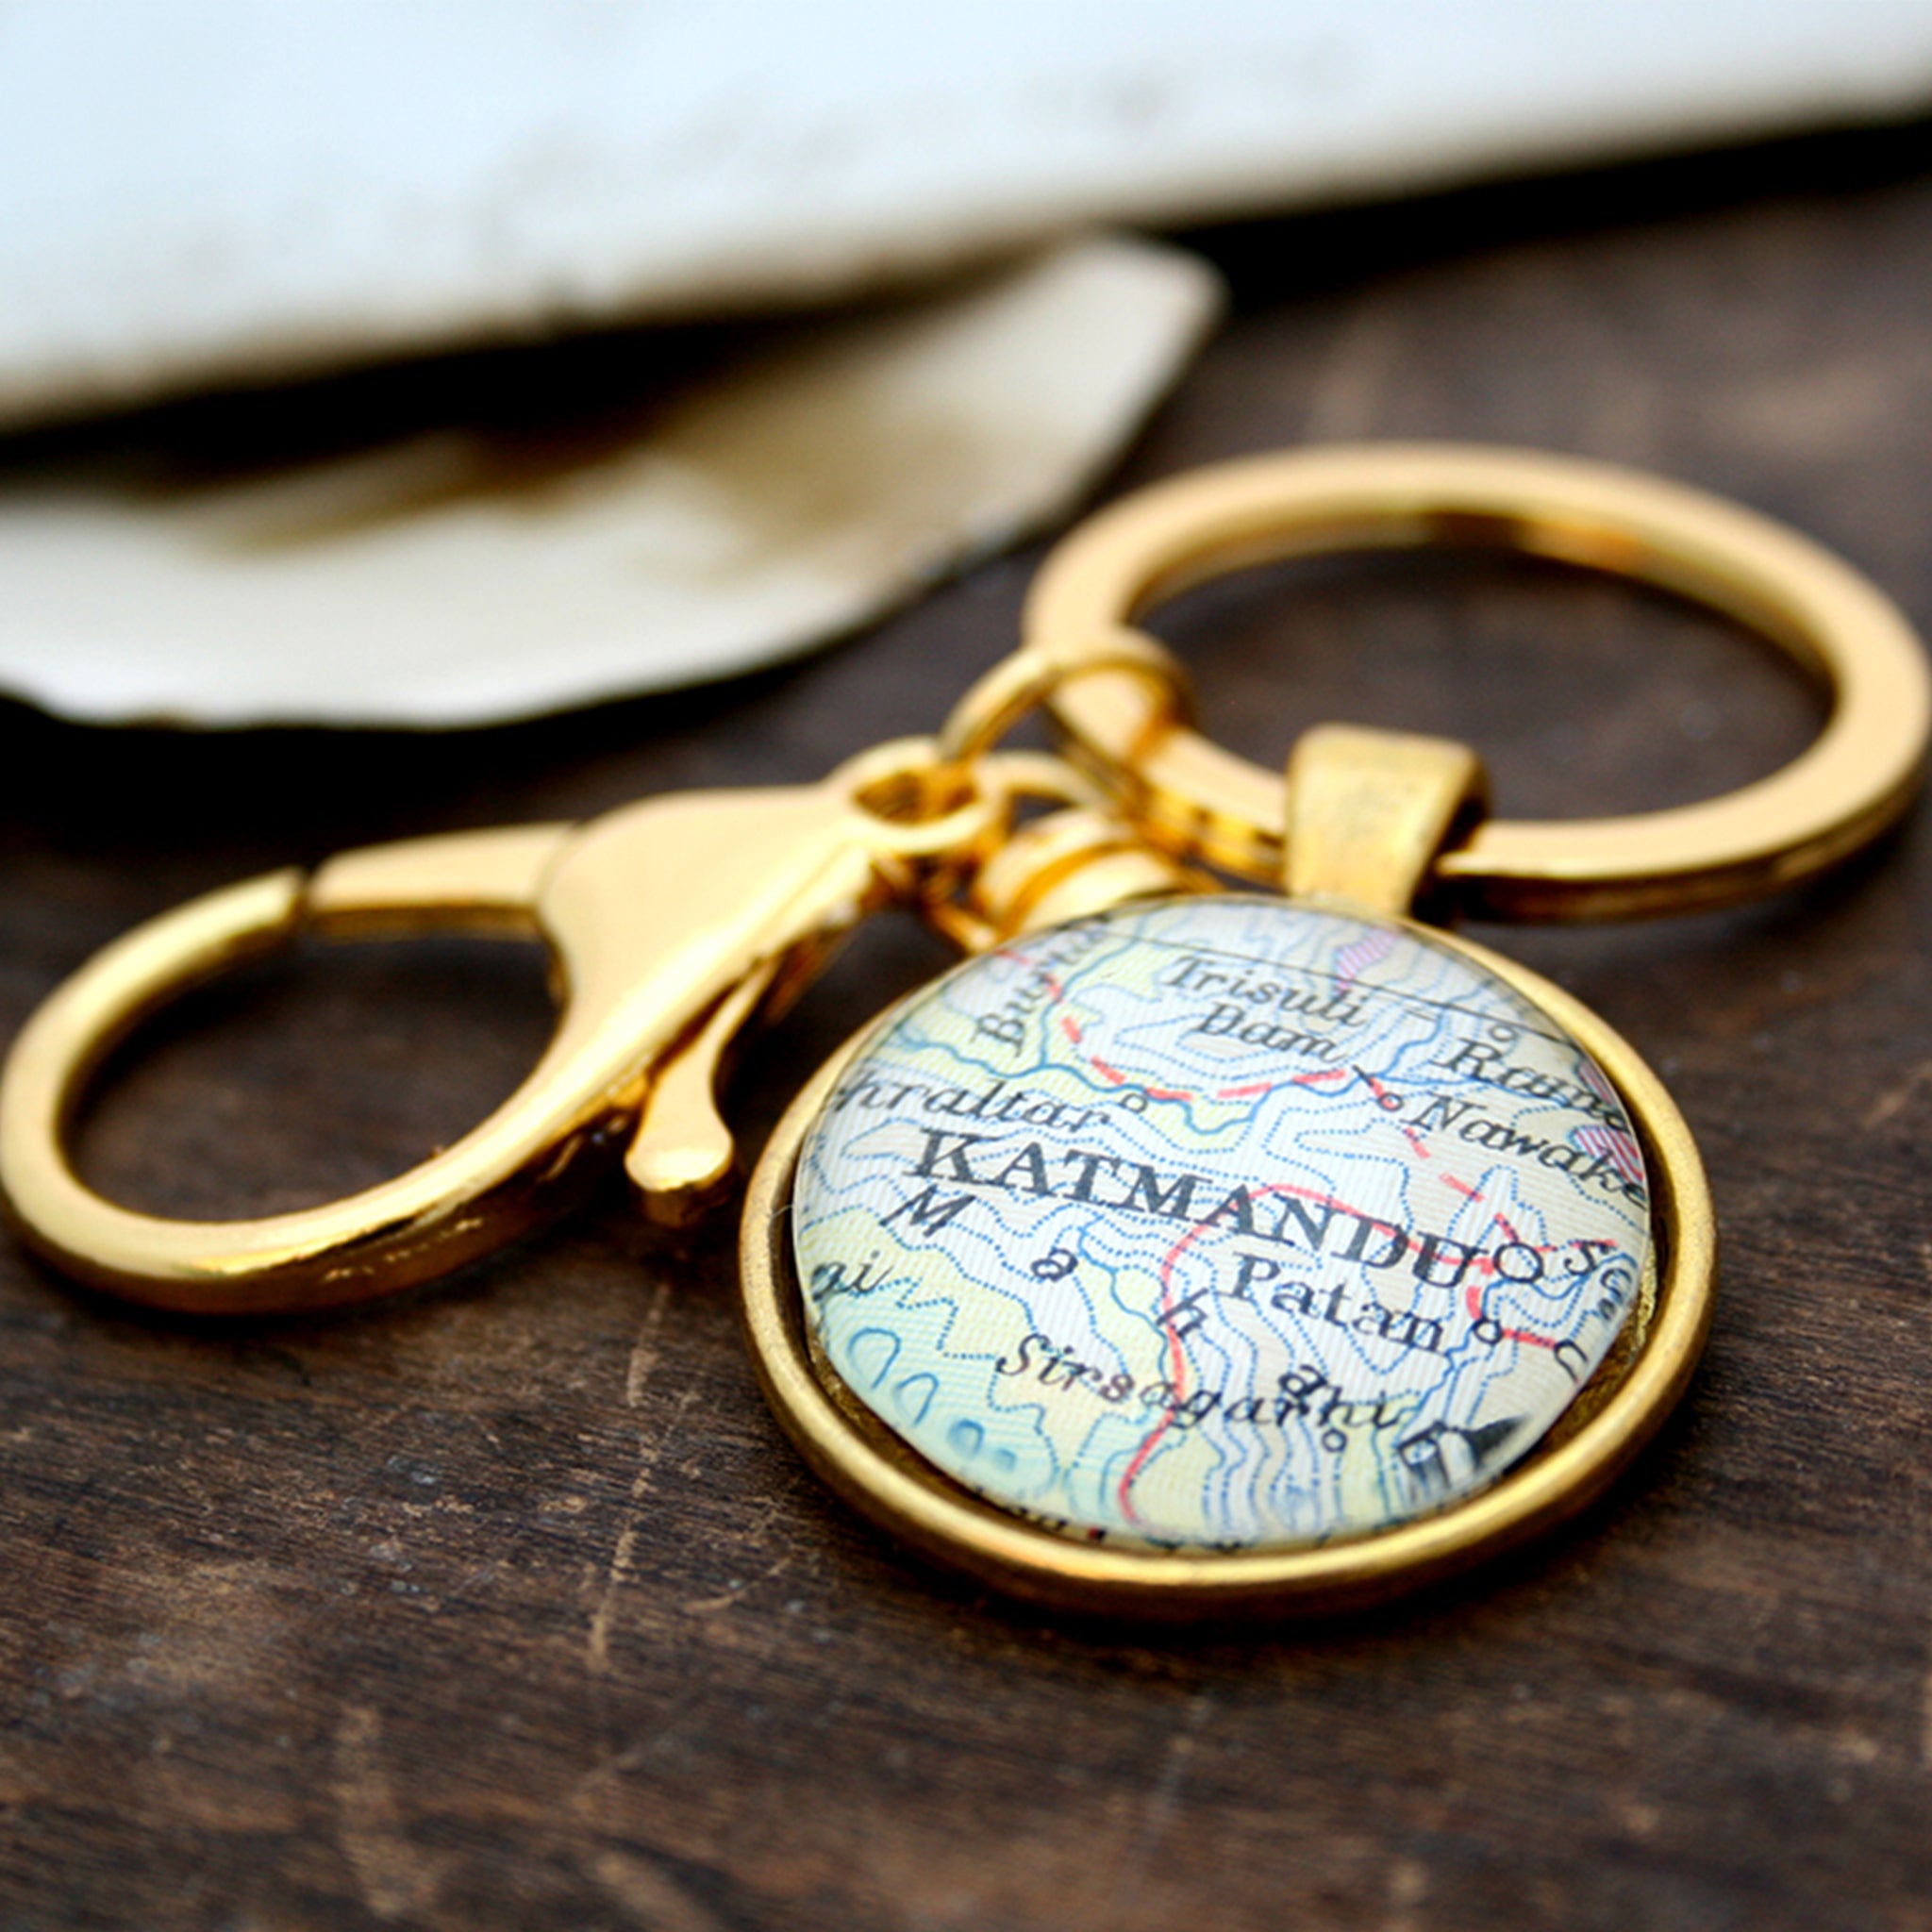 Personalised keyring in gold color featuring map of Kathmandu